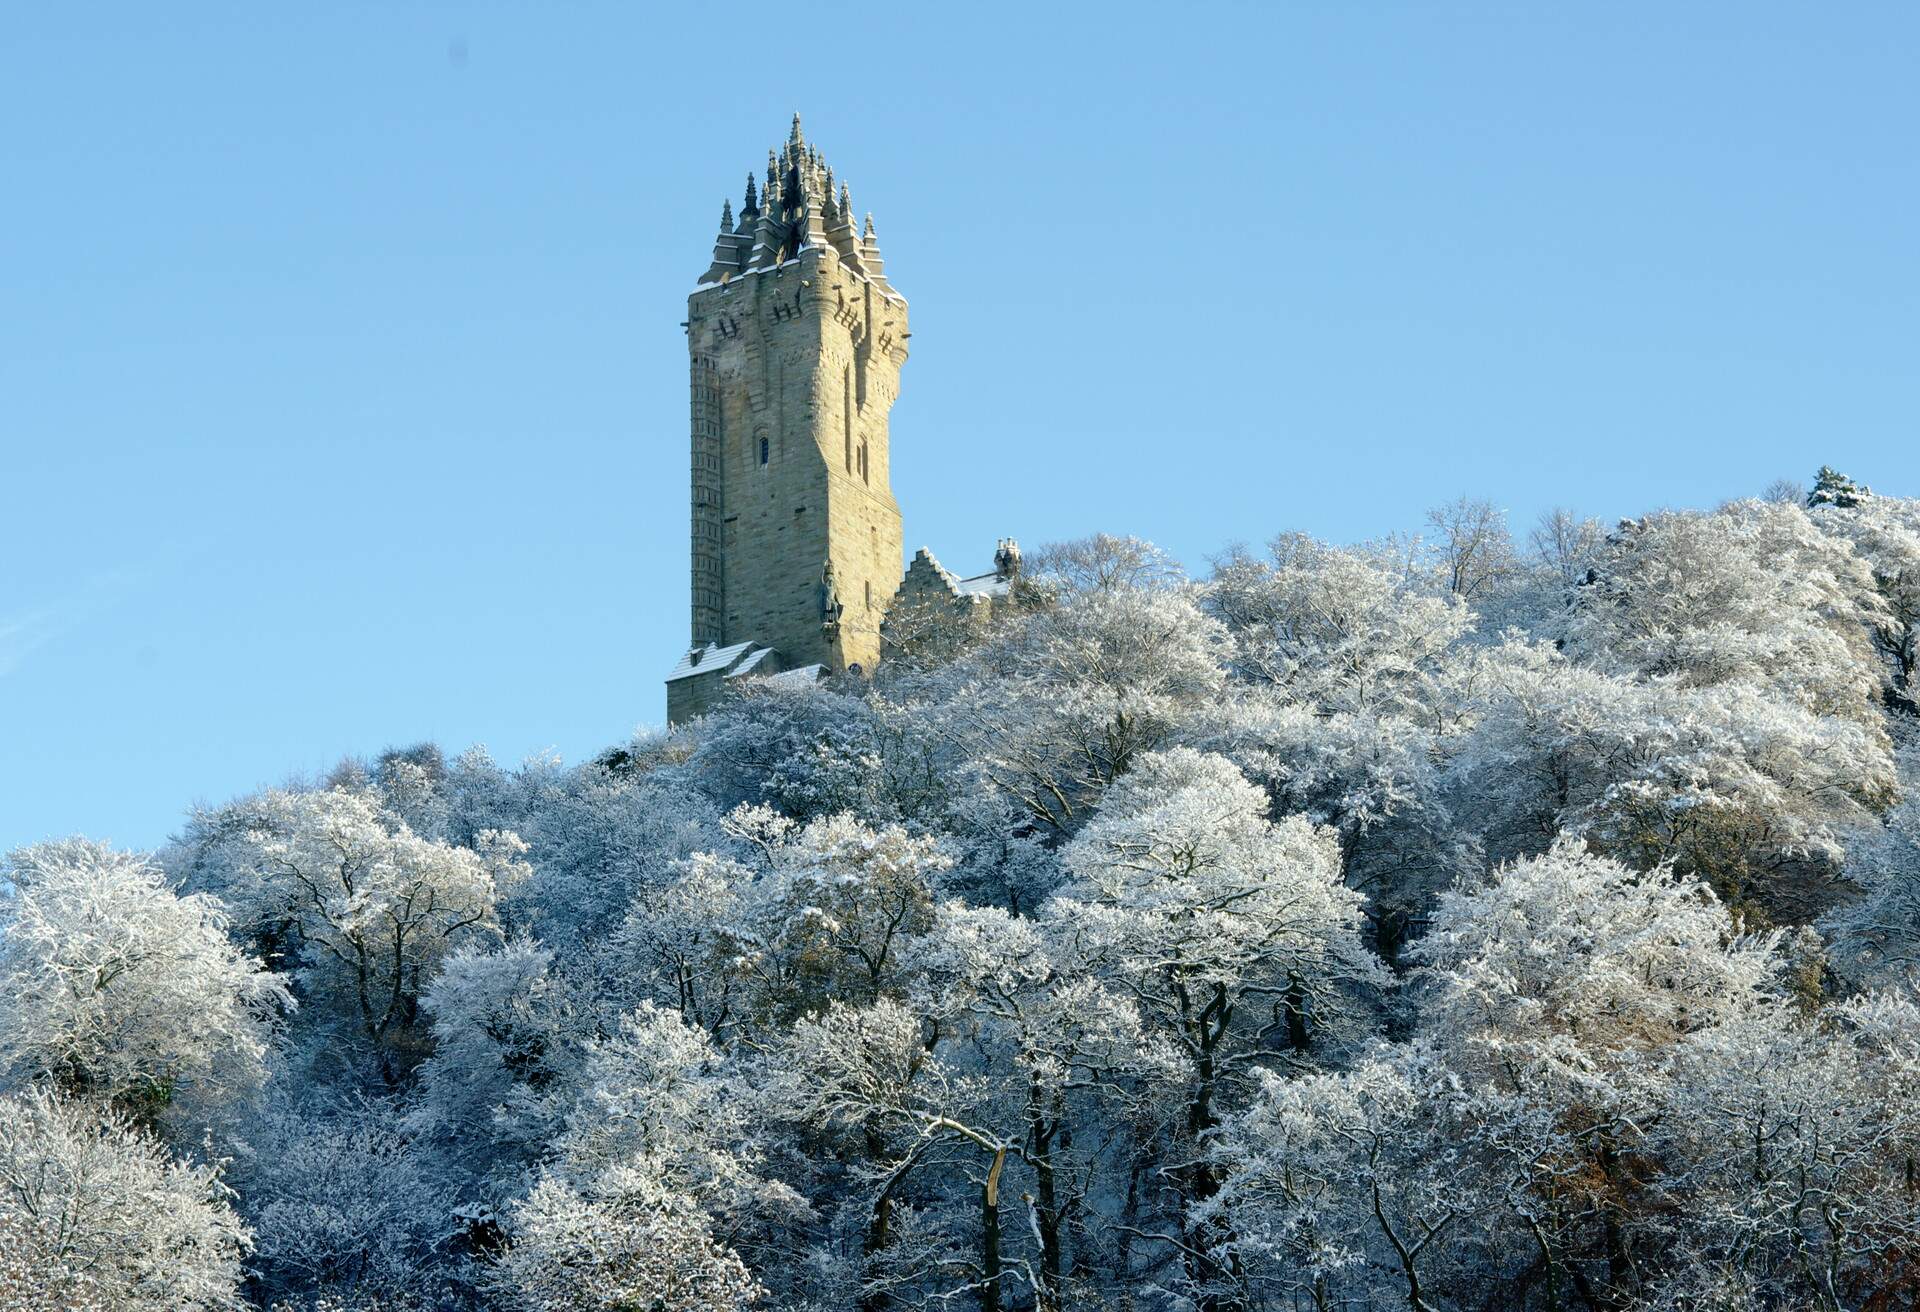 A castle-like tower rising above the trees with leaves glistening in frost.